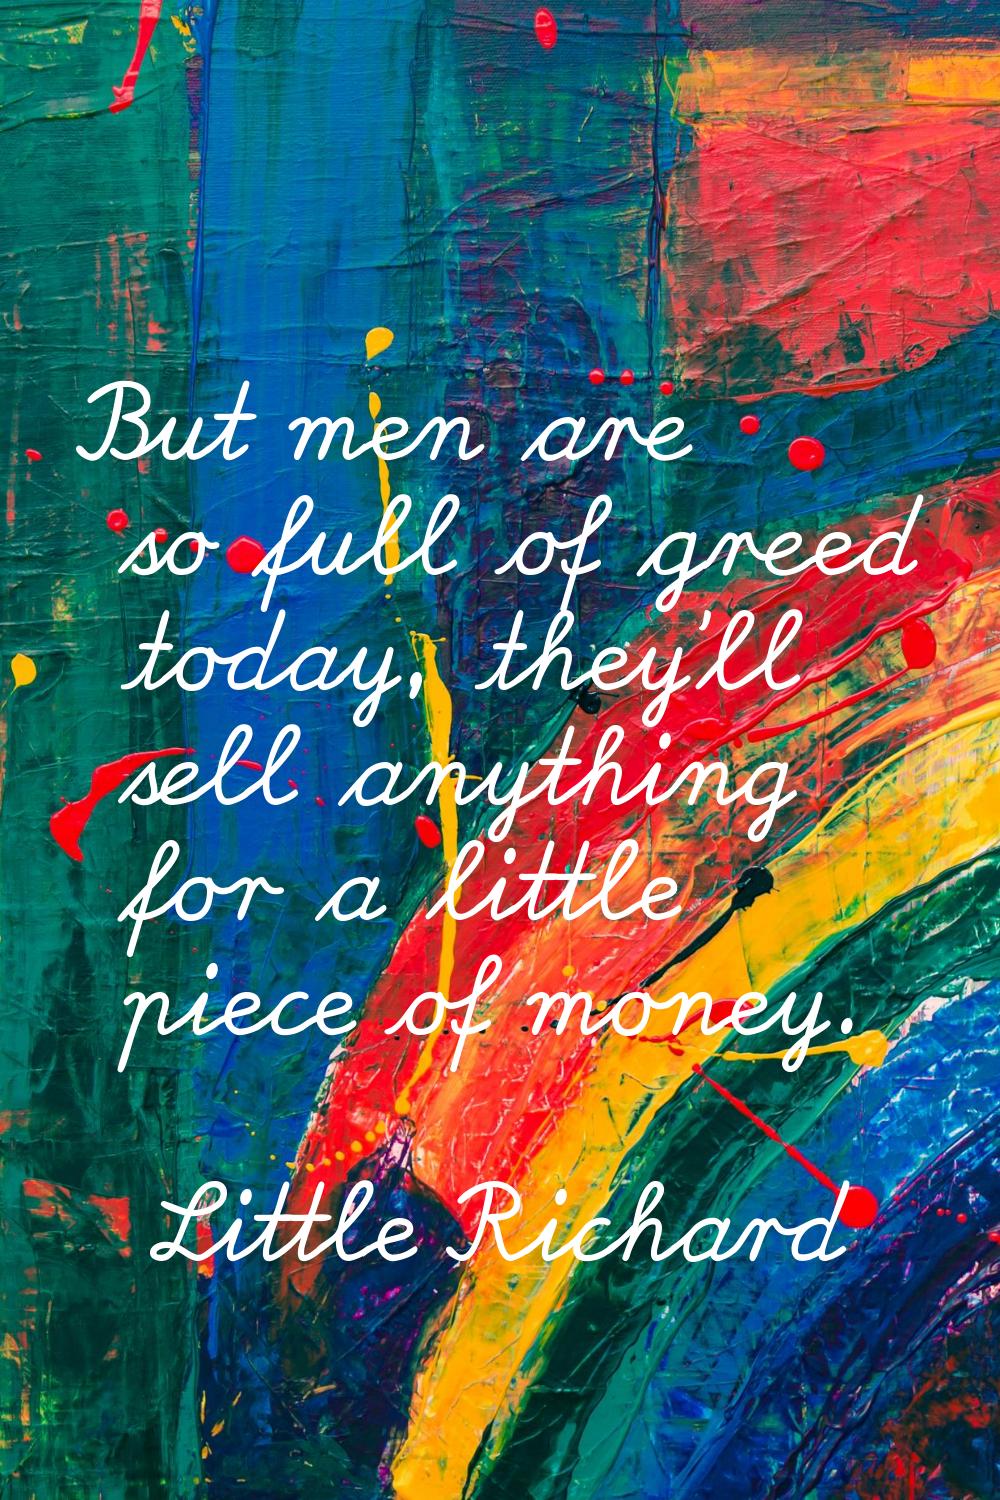 But men are so full of greed today, they'll sell anything for a little piece of money.